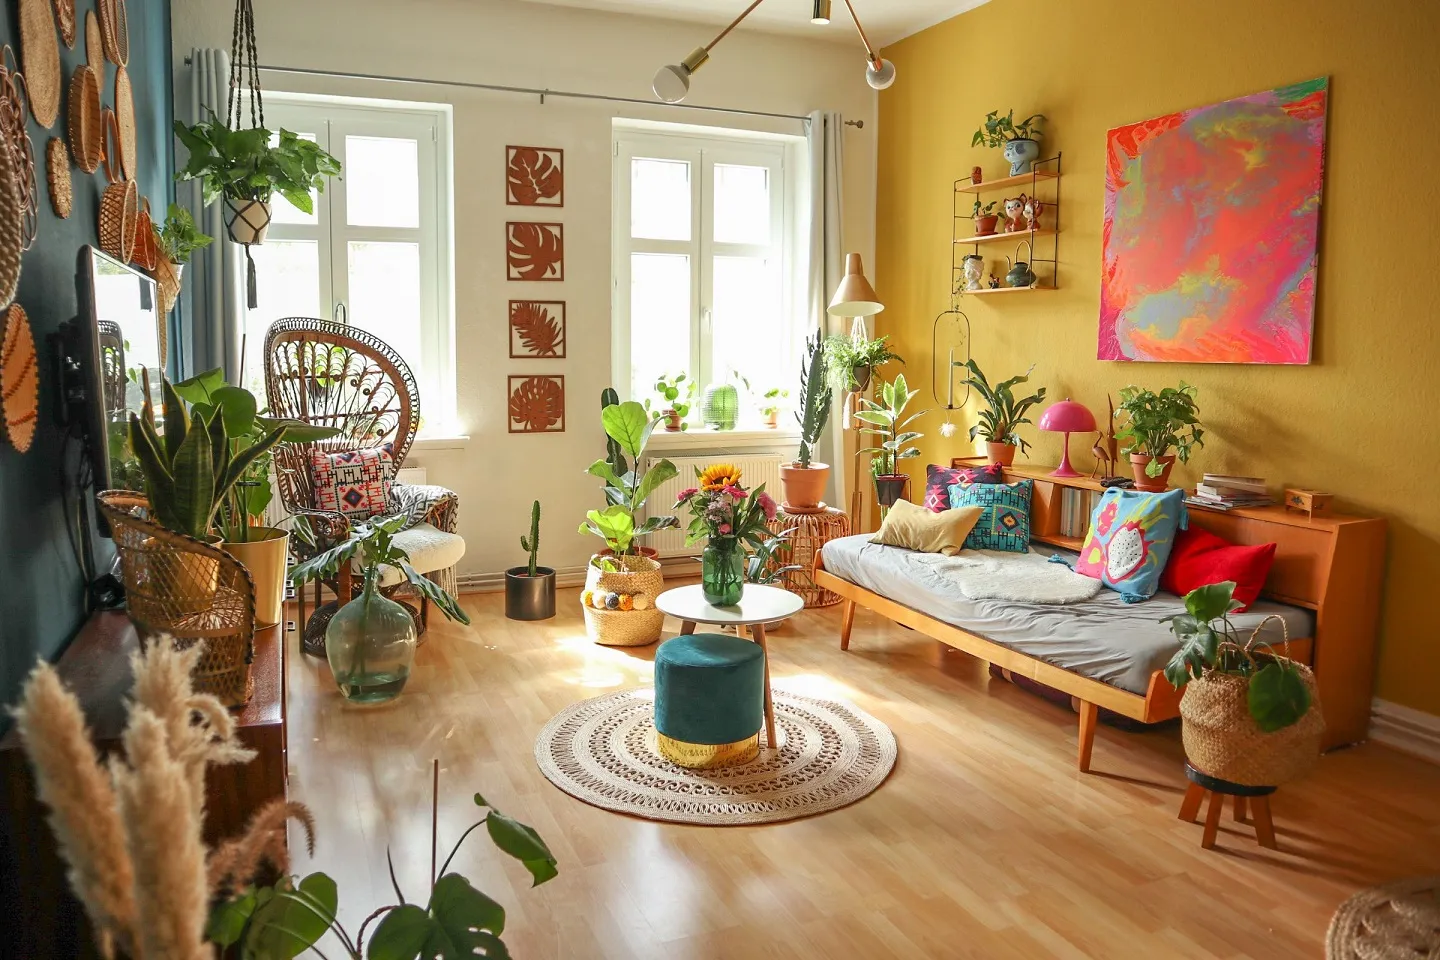 What is a Bohemian interior design?